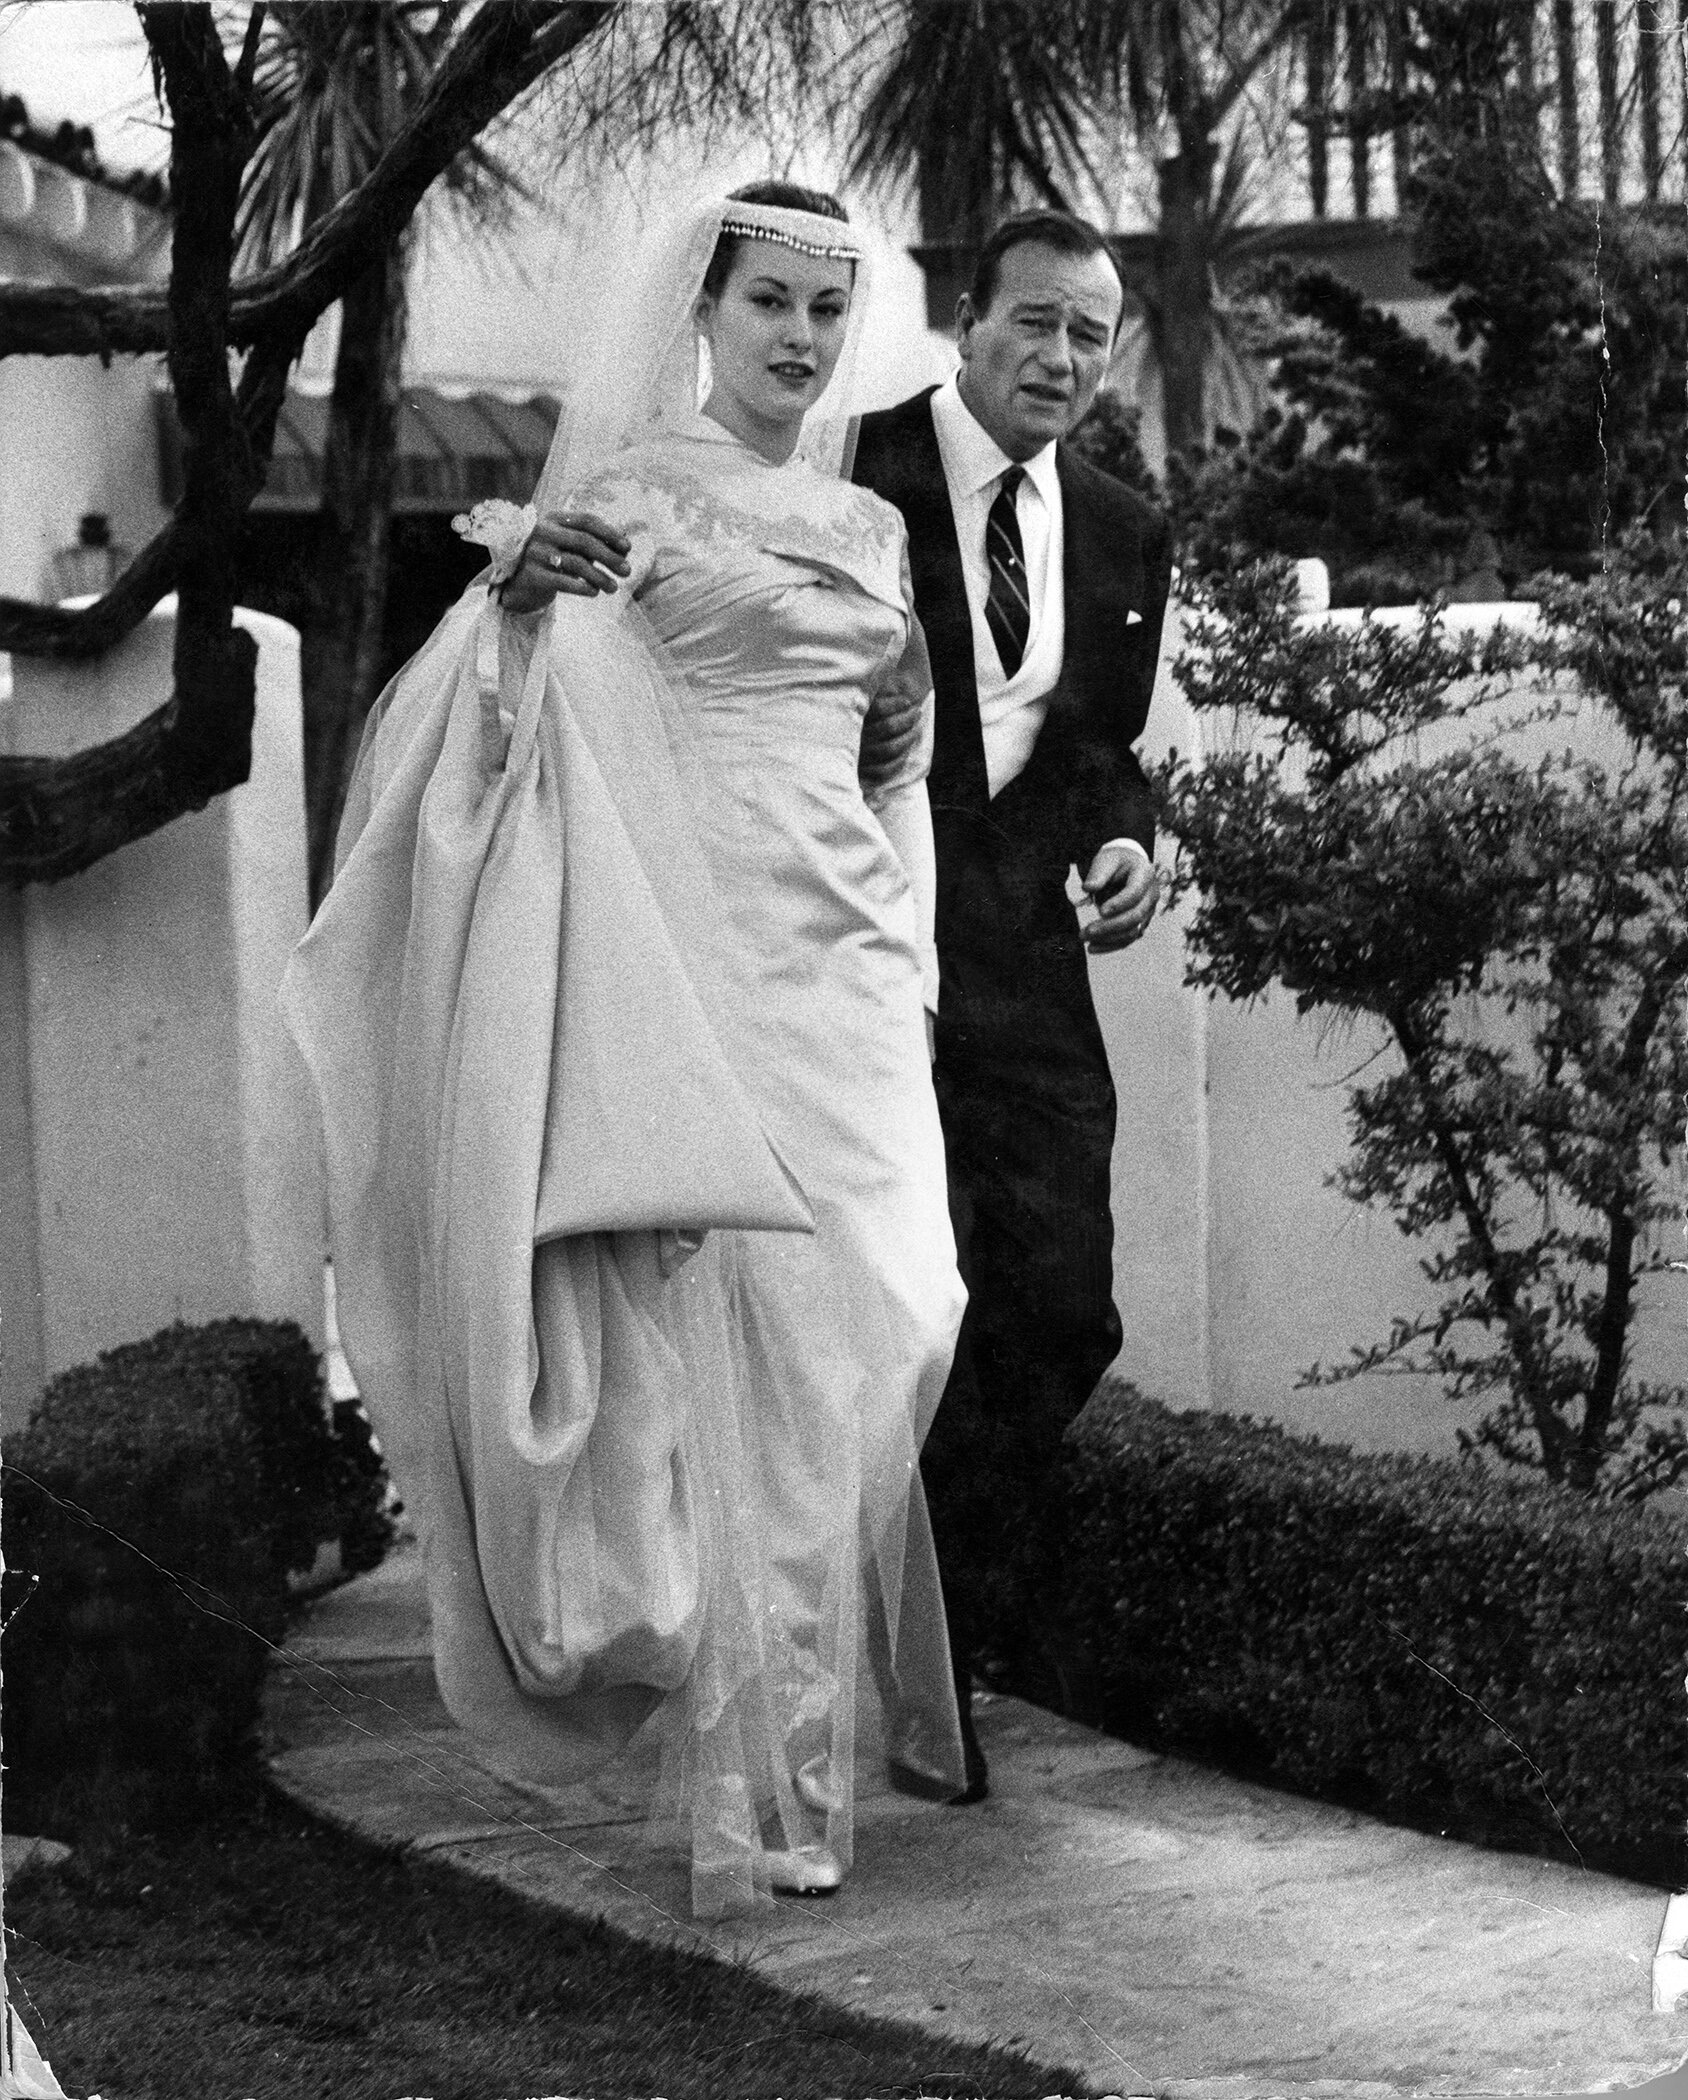 In 1956, Toni married Donald La Cava in Hollywood, CA with her dad by her side.